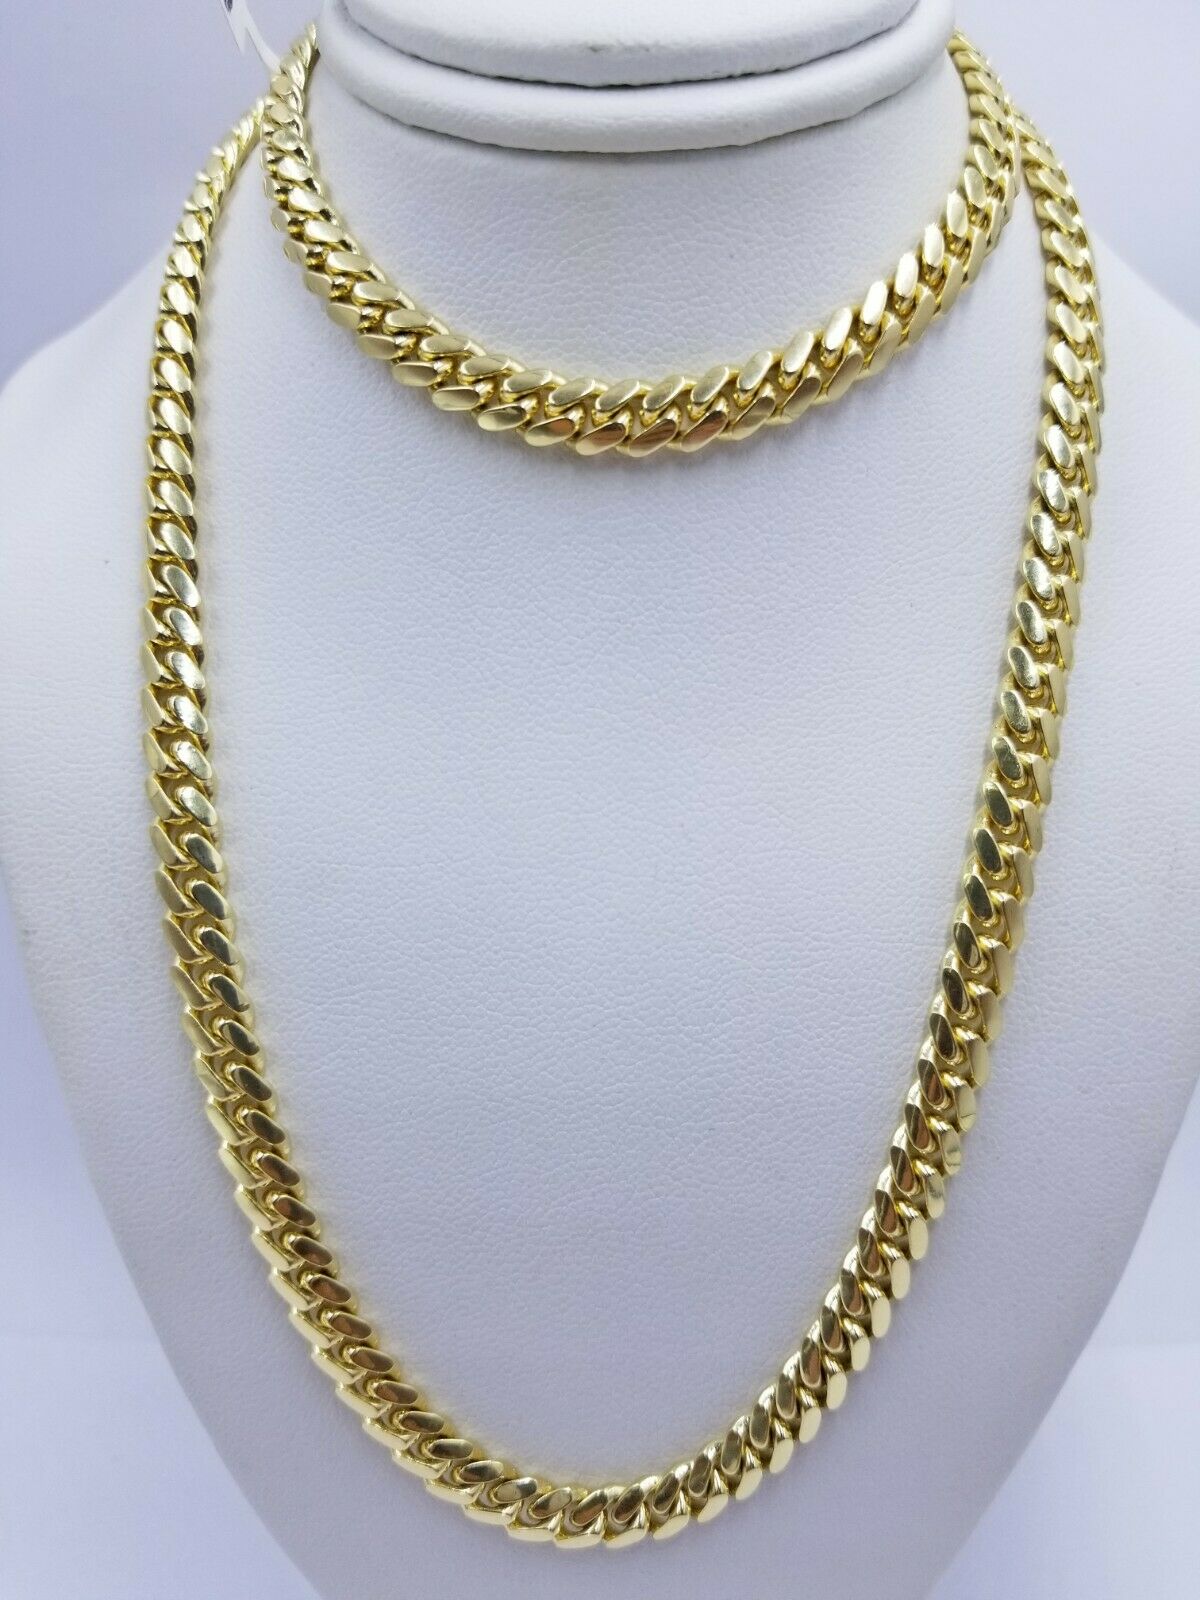 Solid 14k Gold Chain Necklace 22" Miami Cuban Link 6mm Men Women 14kt Yellow Gol